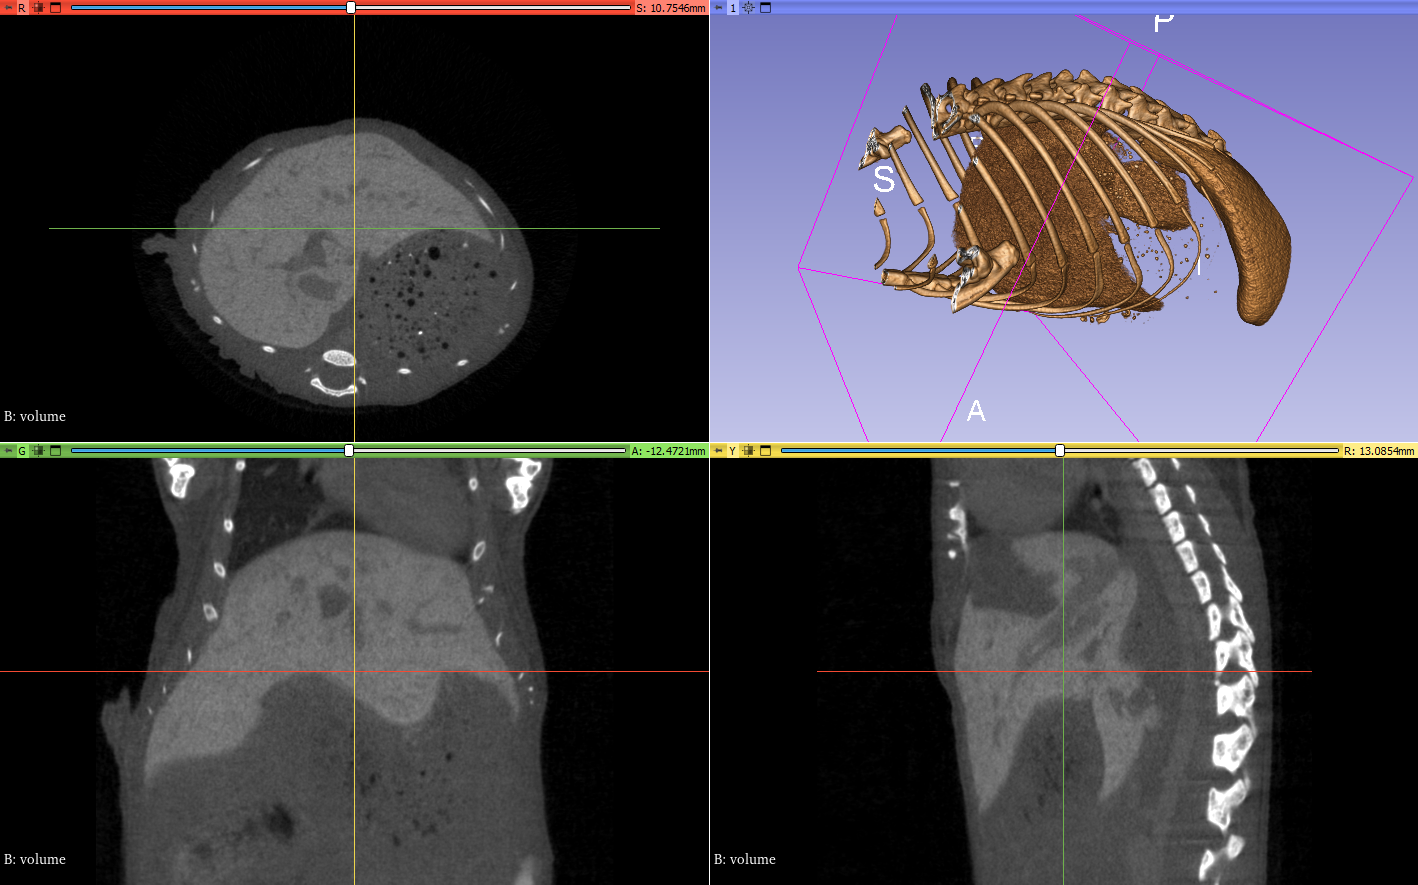 Different views of a CT Scan. Top-left: transverse plane (i.e. axis are left-right and dorsal-ventral); bottom-left: frontal plane (axis are left-right and anterior-posterior); bottom-right: sagittal plane (axis are dorsal-ventral and anterior-posterior); top-right: 3D visualisation showing the bones and most visible organs